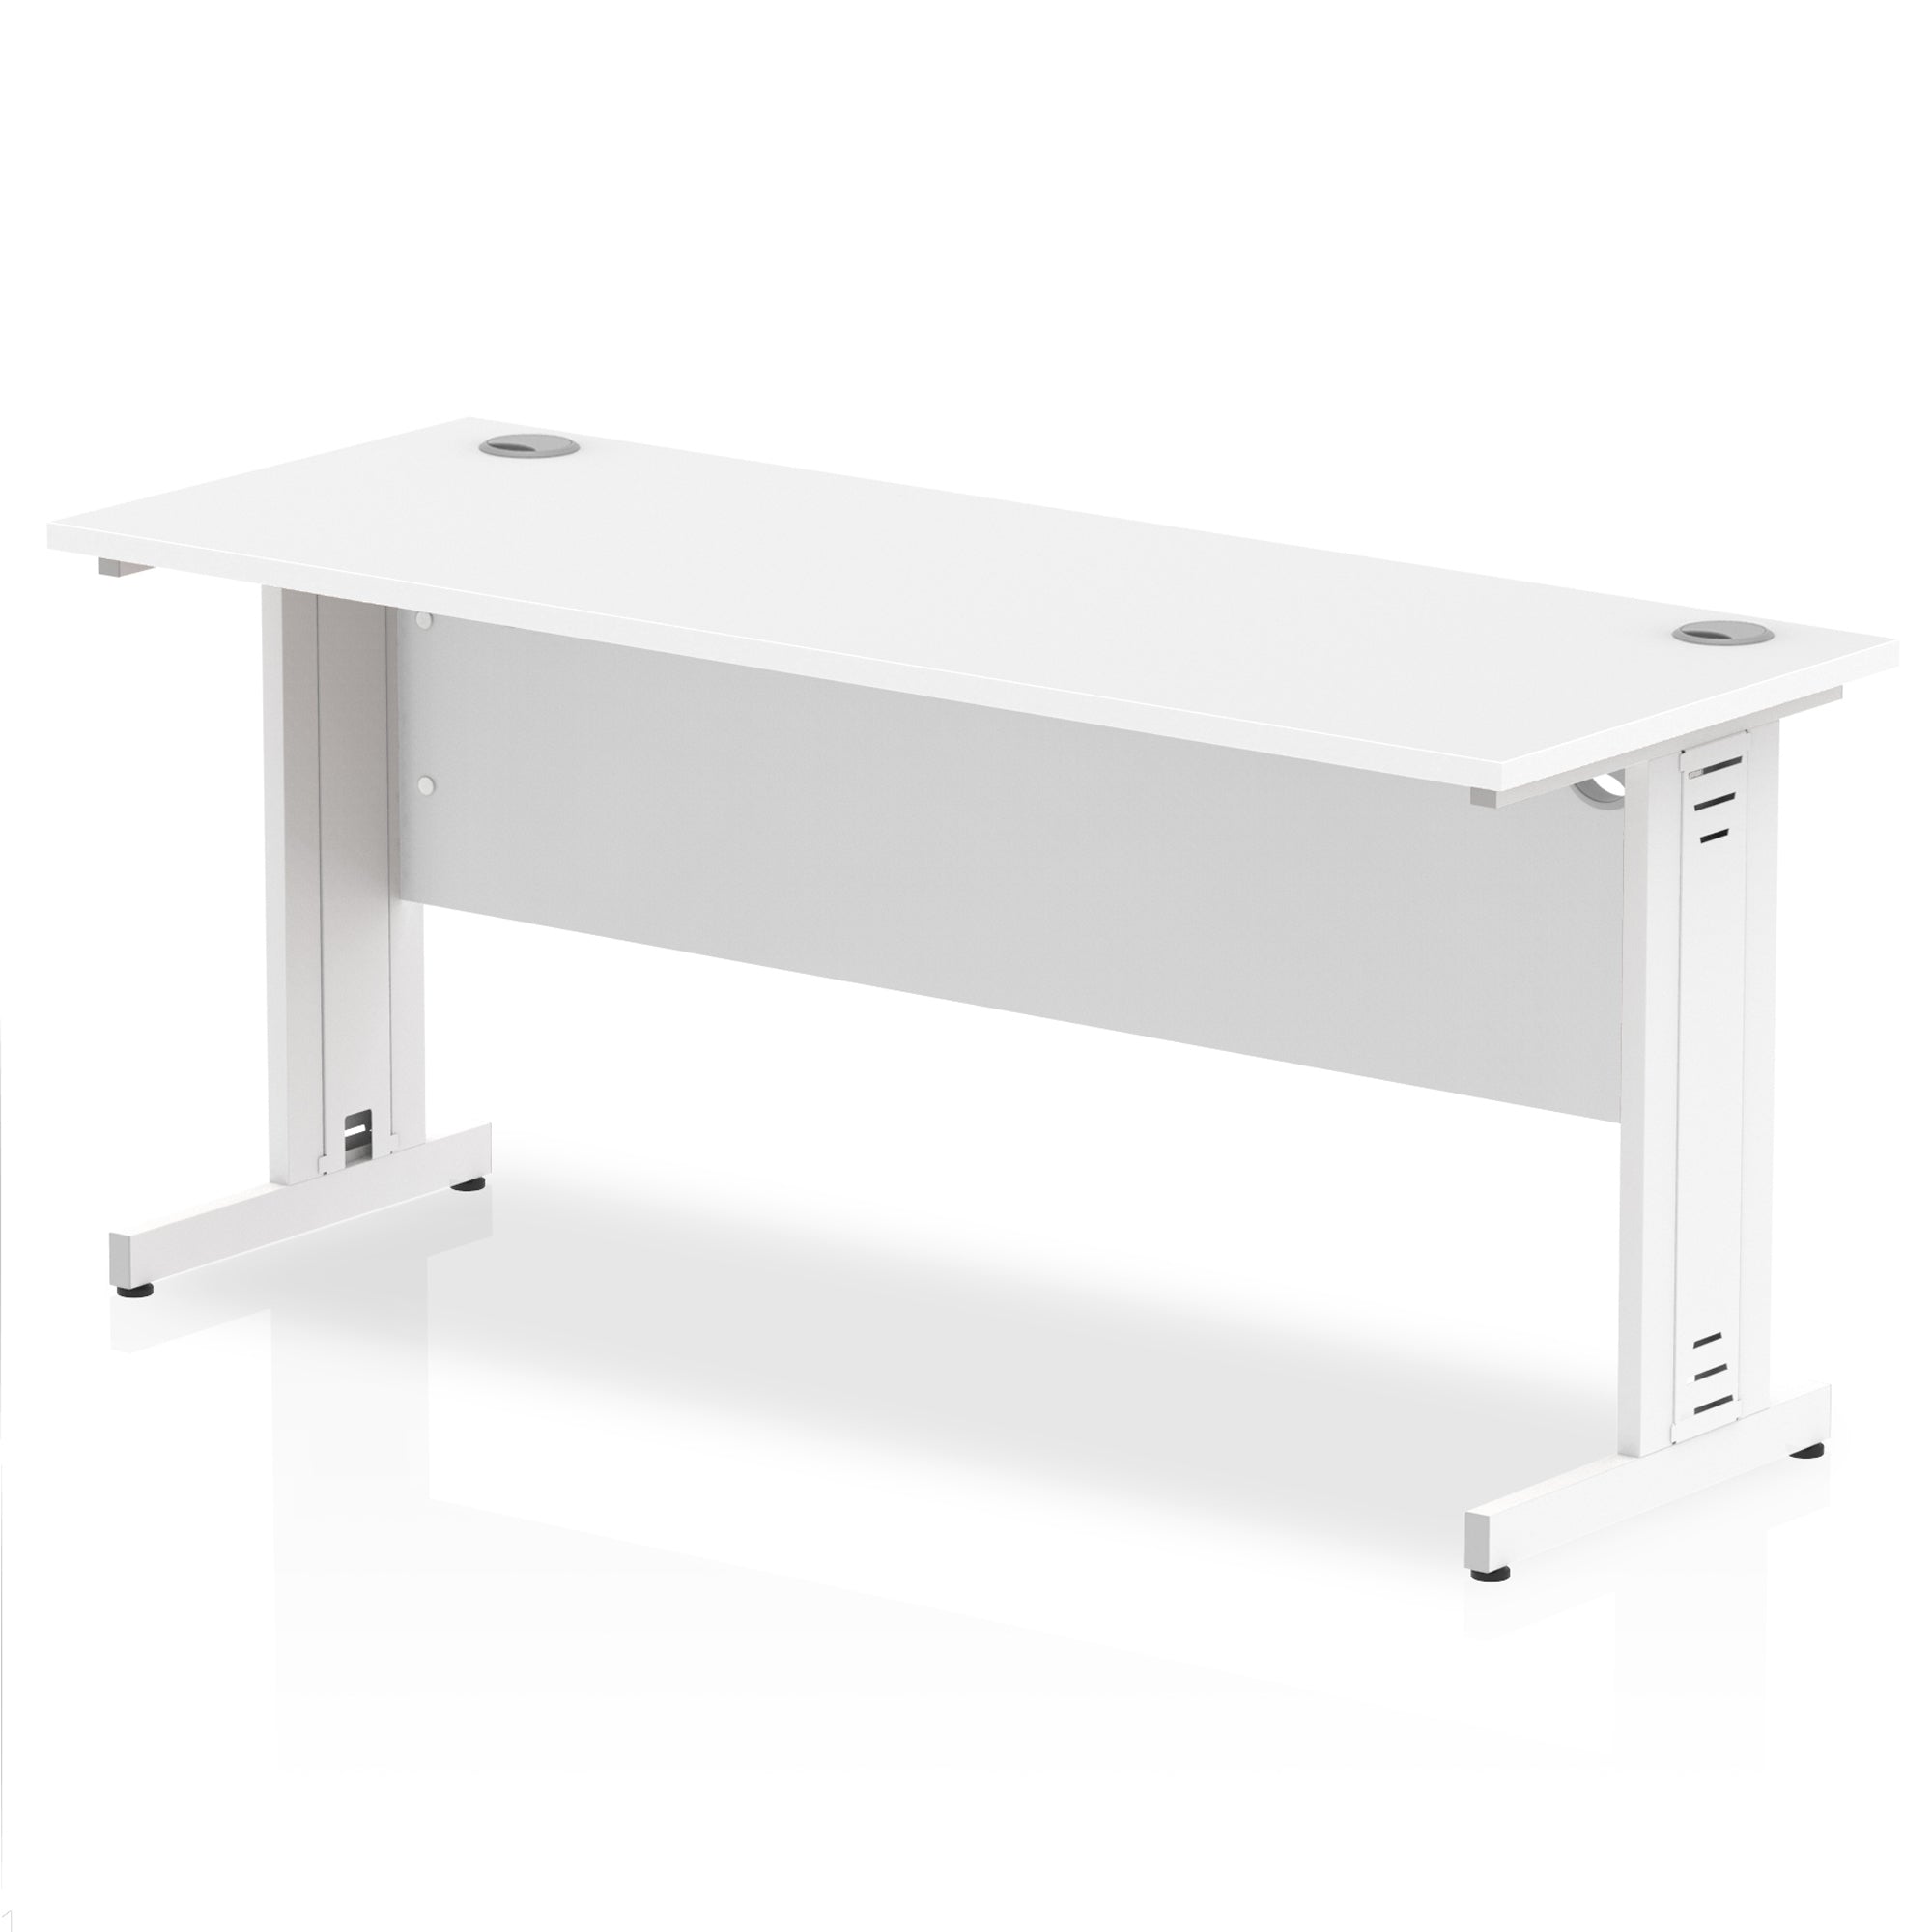 Impulse 1600mm Slimline Desk with Cable Managed Leg - MFC Rectangular Table, Self-Assembly, 5-Year Guarantee, Silver/White Frame